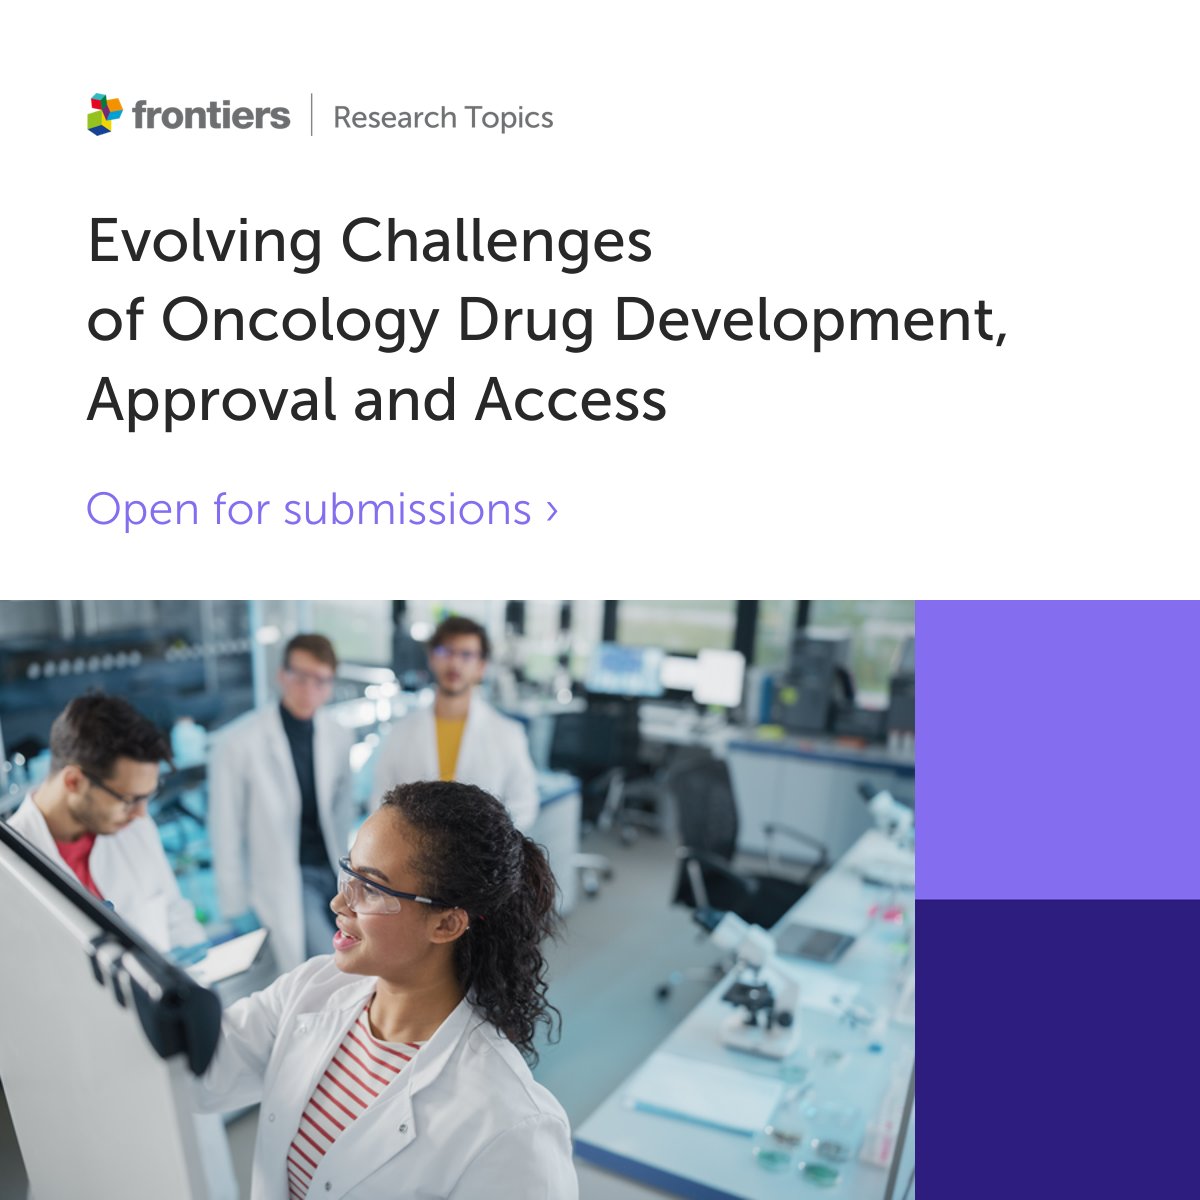 📢 Call for papers! Our Research Topic ''Evolving Challenges of Oncology Drug Development, Approval and Access'' is open for submissions! Edited by Giovanni Tafuri, Jorge Martinalbo, Alexandre Moreau, and Rosa Giuliani Submit or find out more here: fro.ntiers.in/hfY3